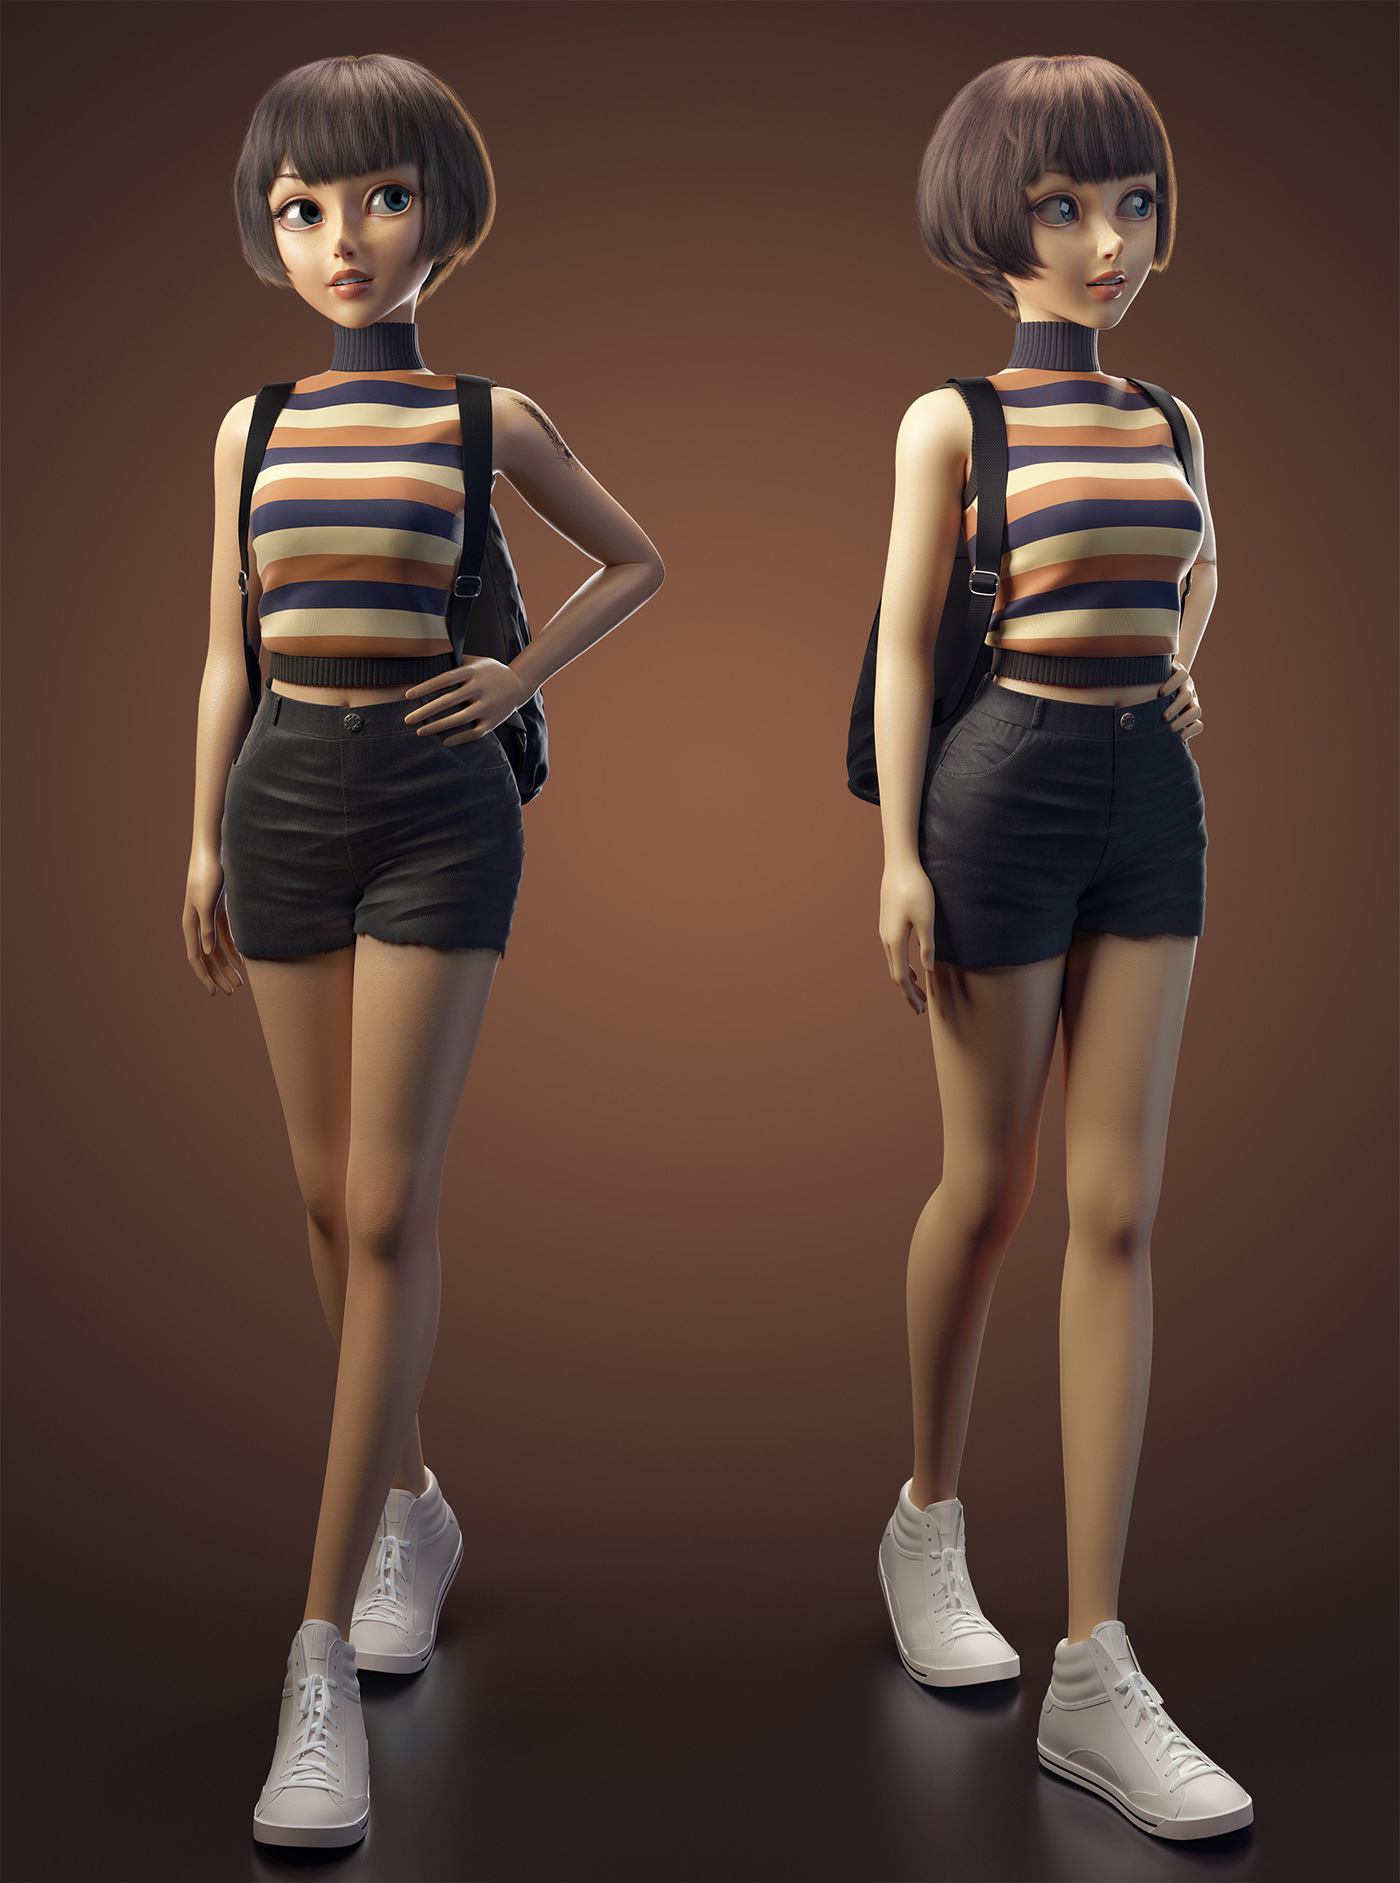 3D 3D Character character modeling 3d modeling digital 3d texturing cartoon Clothing cute realistic render